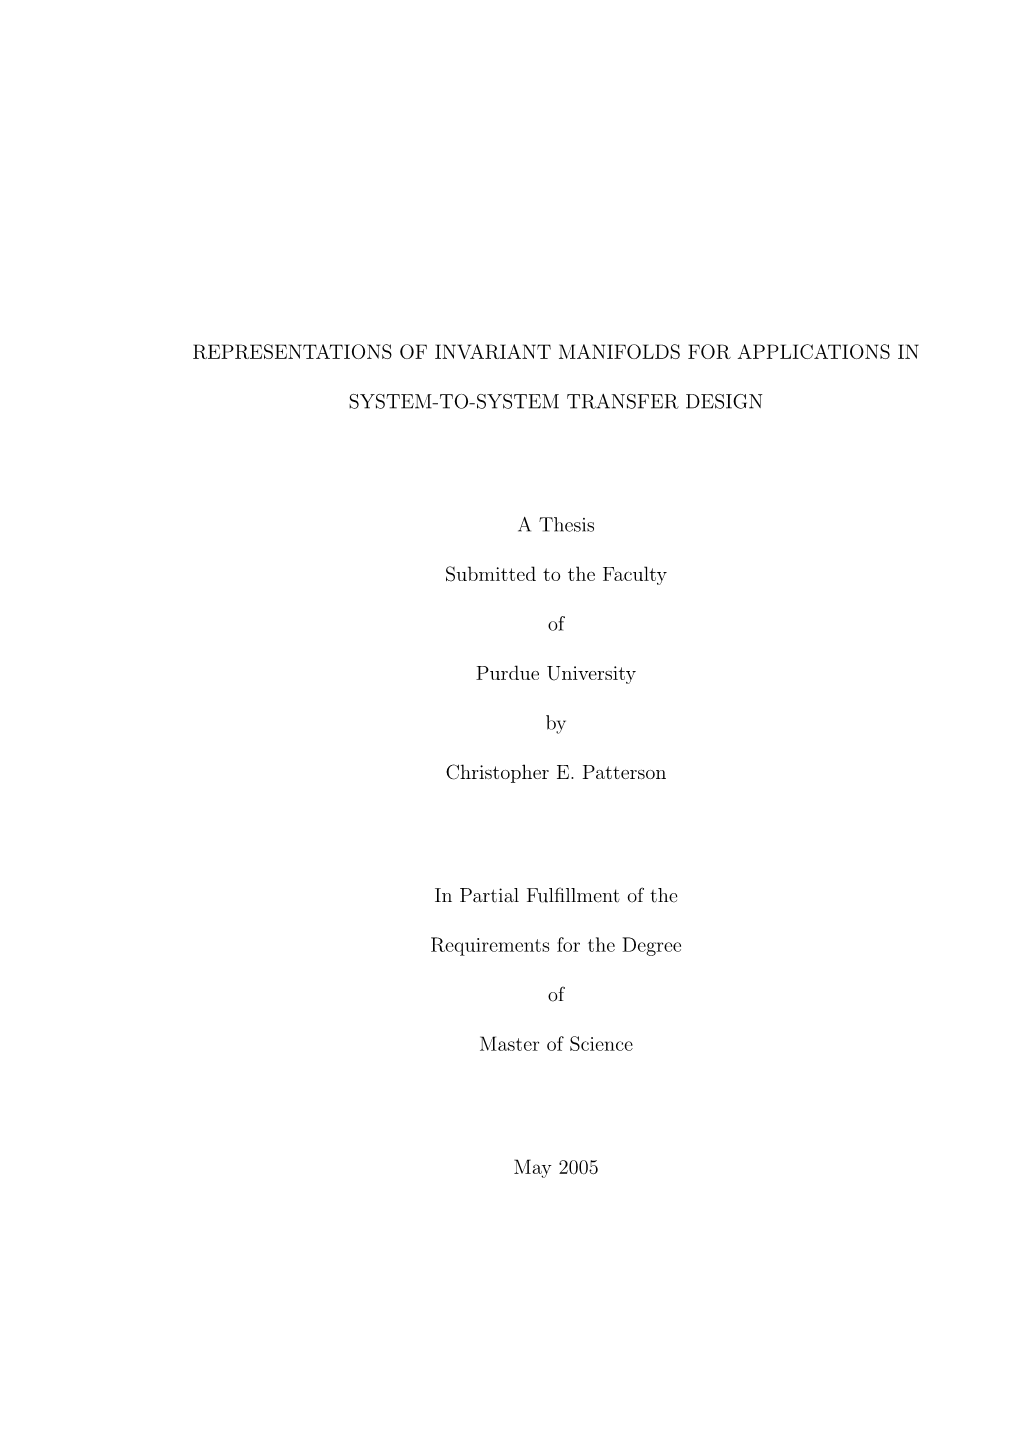 REPRESENTATIONS of INVARIANT MANIFOLDS for APPLICATIONS in SYSTEM-TO-SYSTEM TRANSFER DESIGN a Thesis Submitted to the Faculty Of